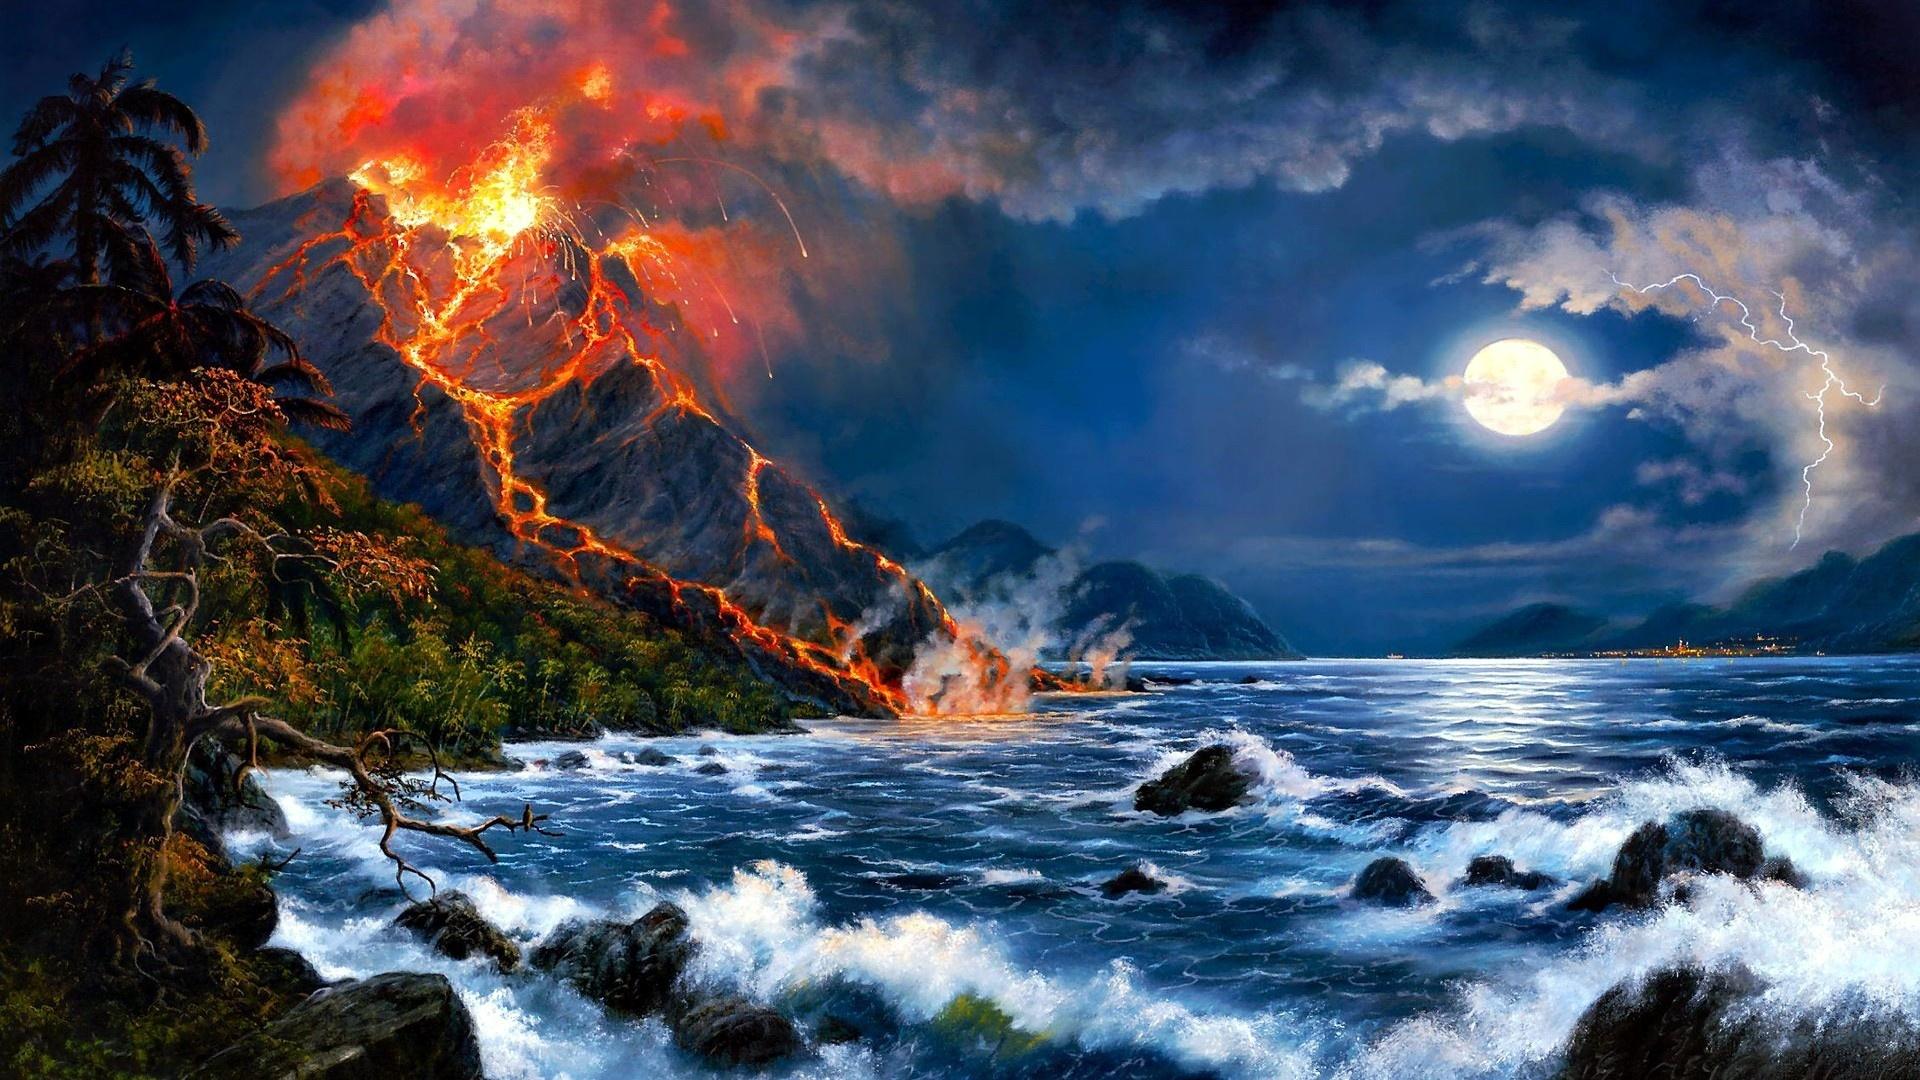 Erupting Volcano Oil Painting Art Picture Image Wallpaper HD Free